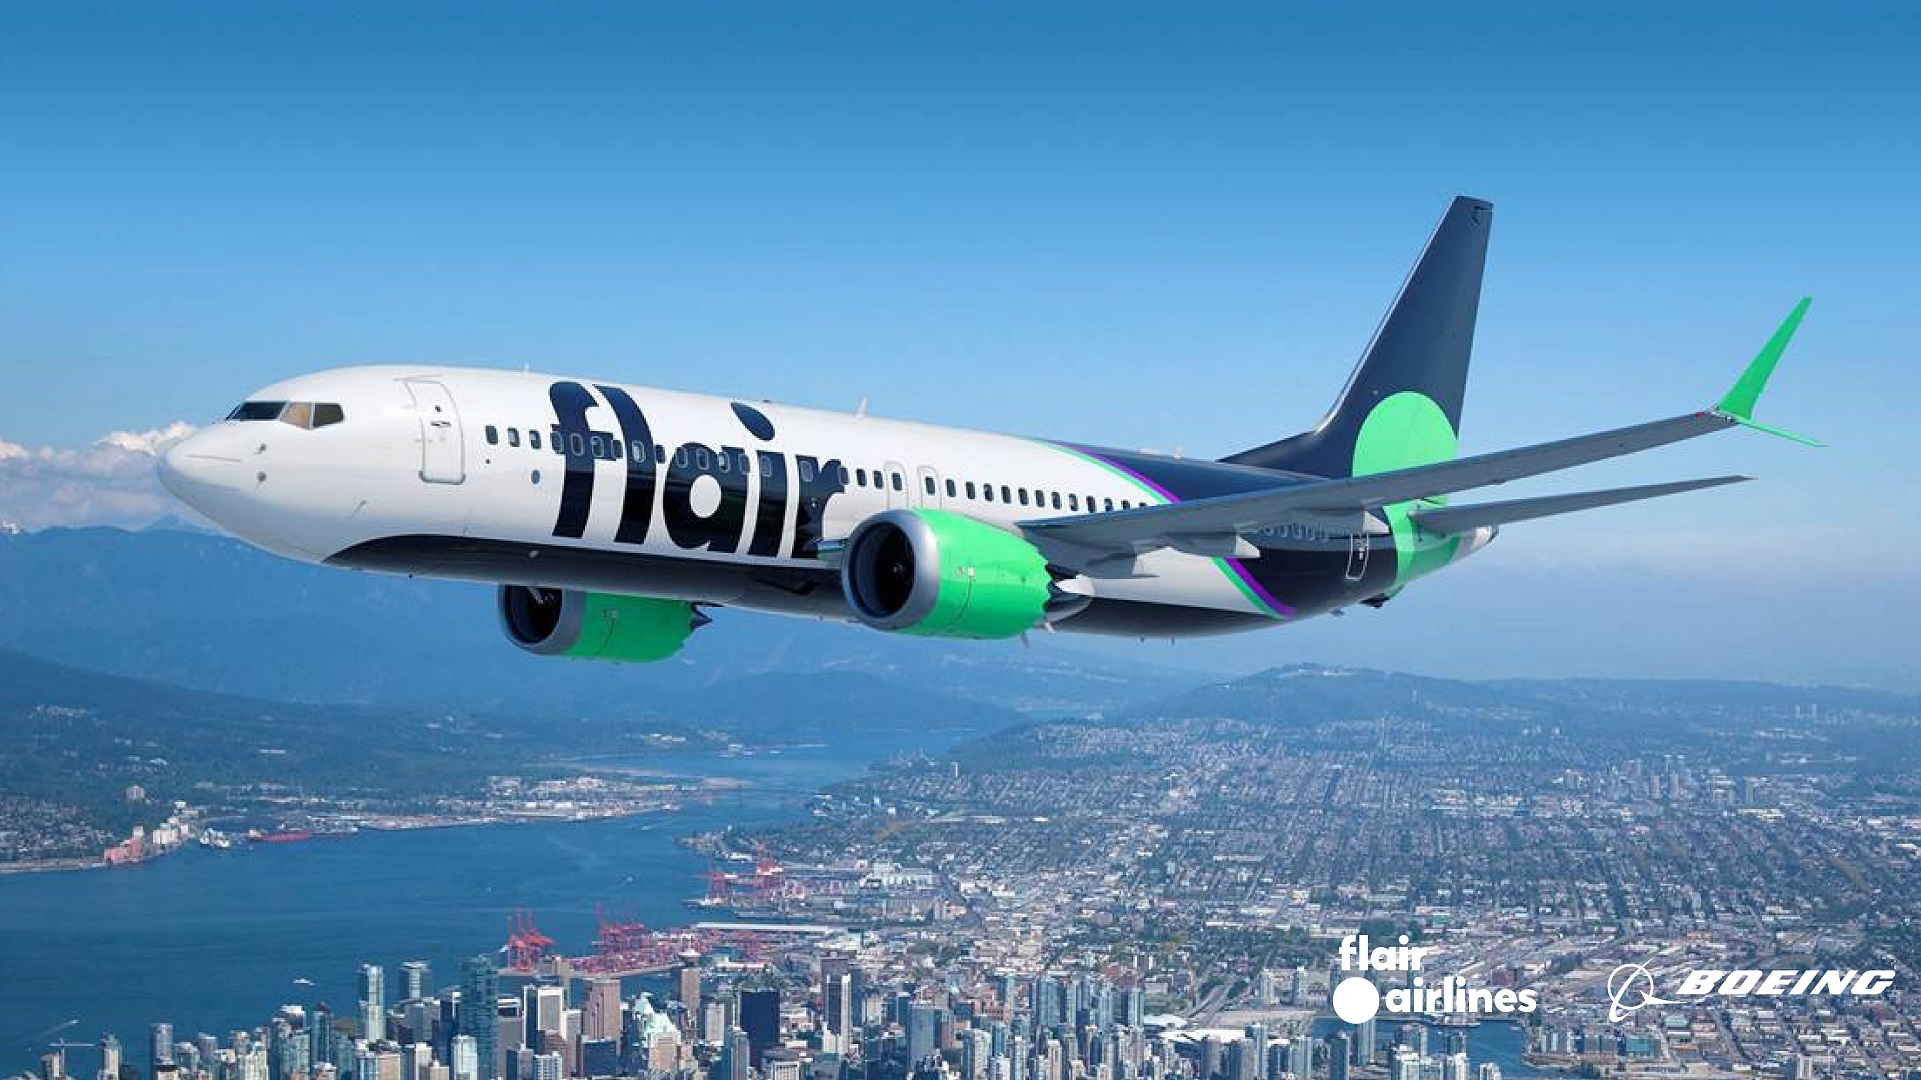 A Boeing 737 wearing Flair Airlines livery is shown in this handout photo from Flair.